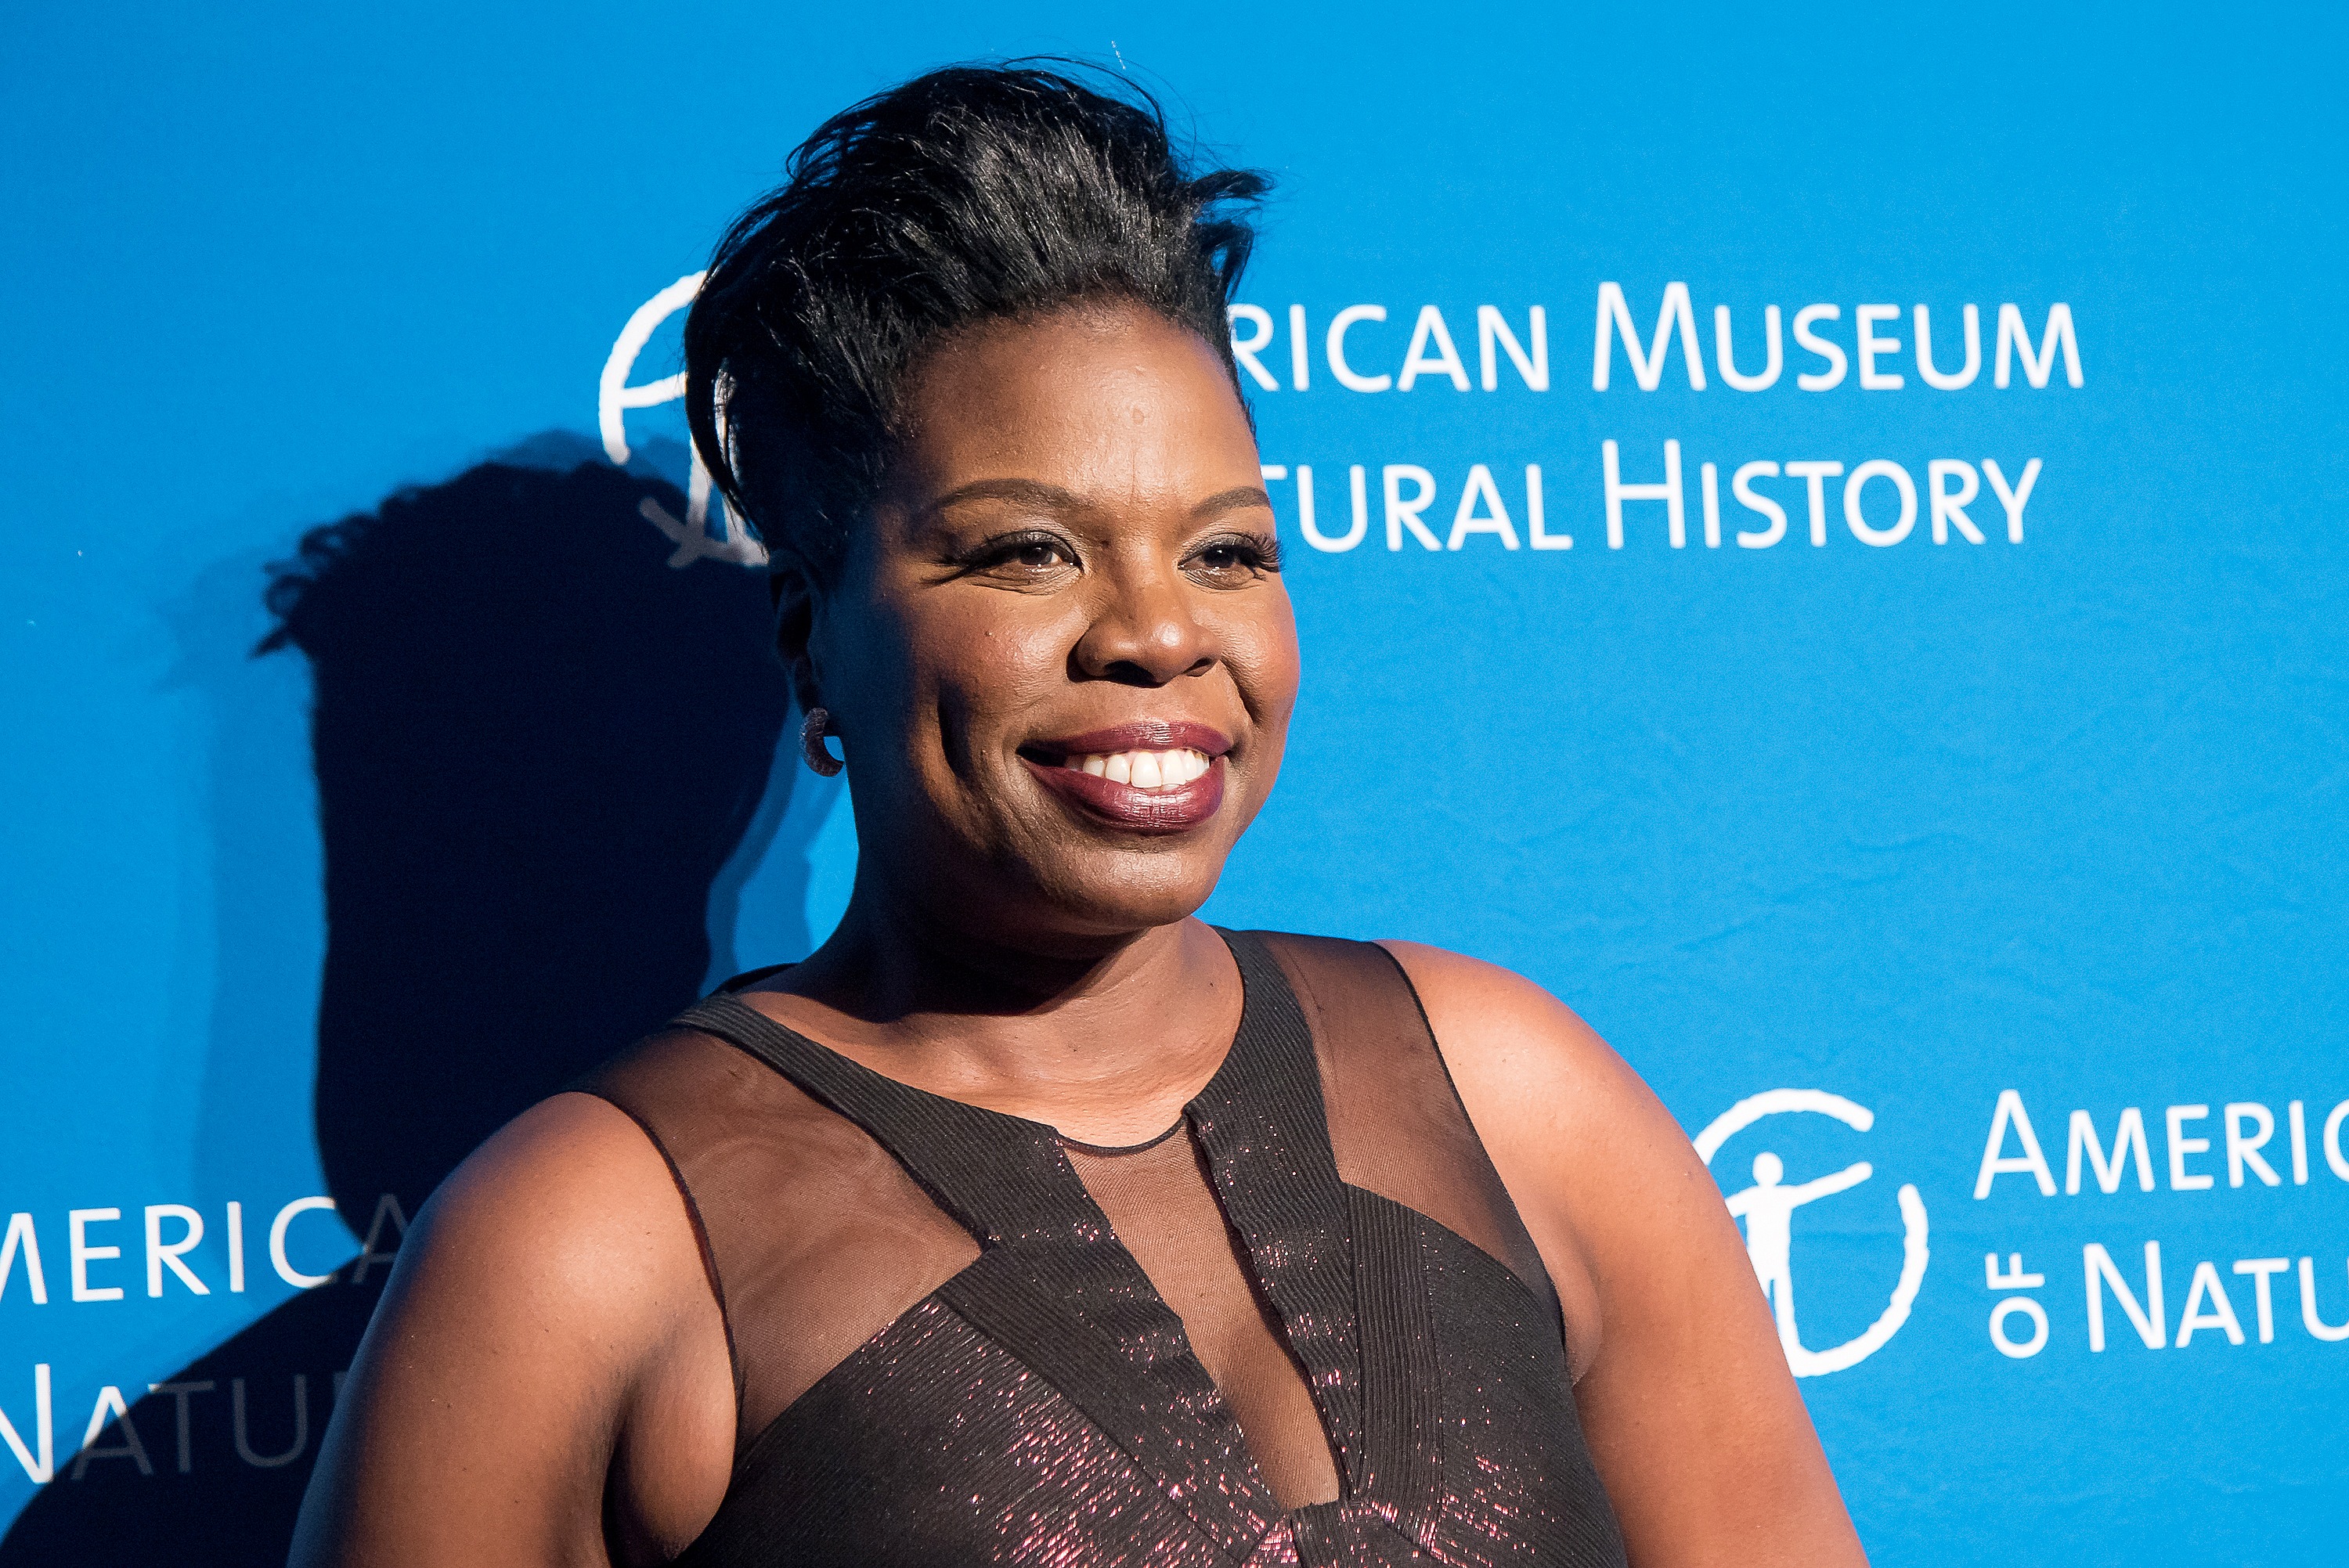 NEW YORK, NY - NOVEMBER 17:  Leslie Jones attends the 2016 American Museum Of Natural History Museum Gala at American Museum of Natural History on November 17, 2016 in New York City.  (Photo by Mike Pont/WireImage) (Mike Pont&mdash;WireImage)